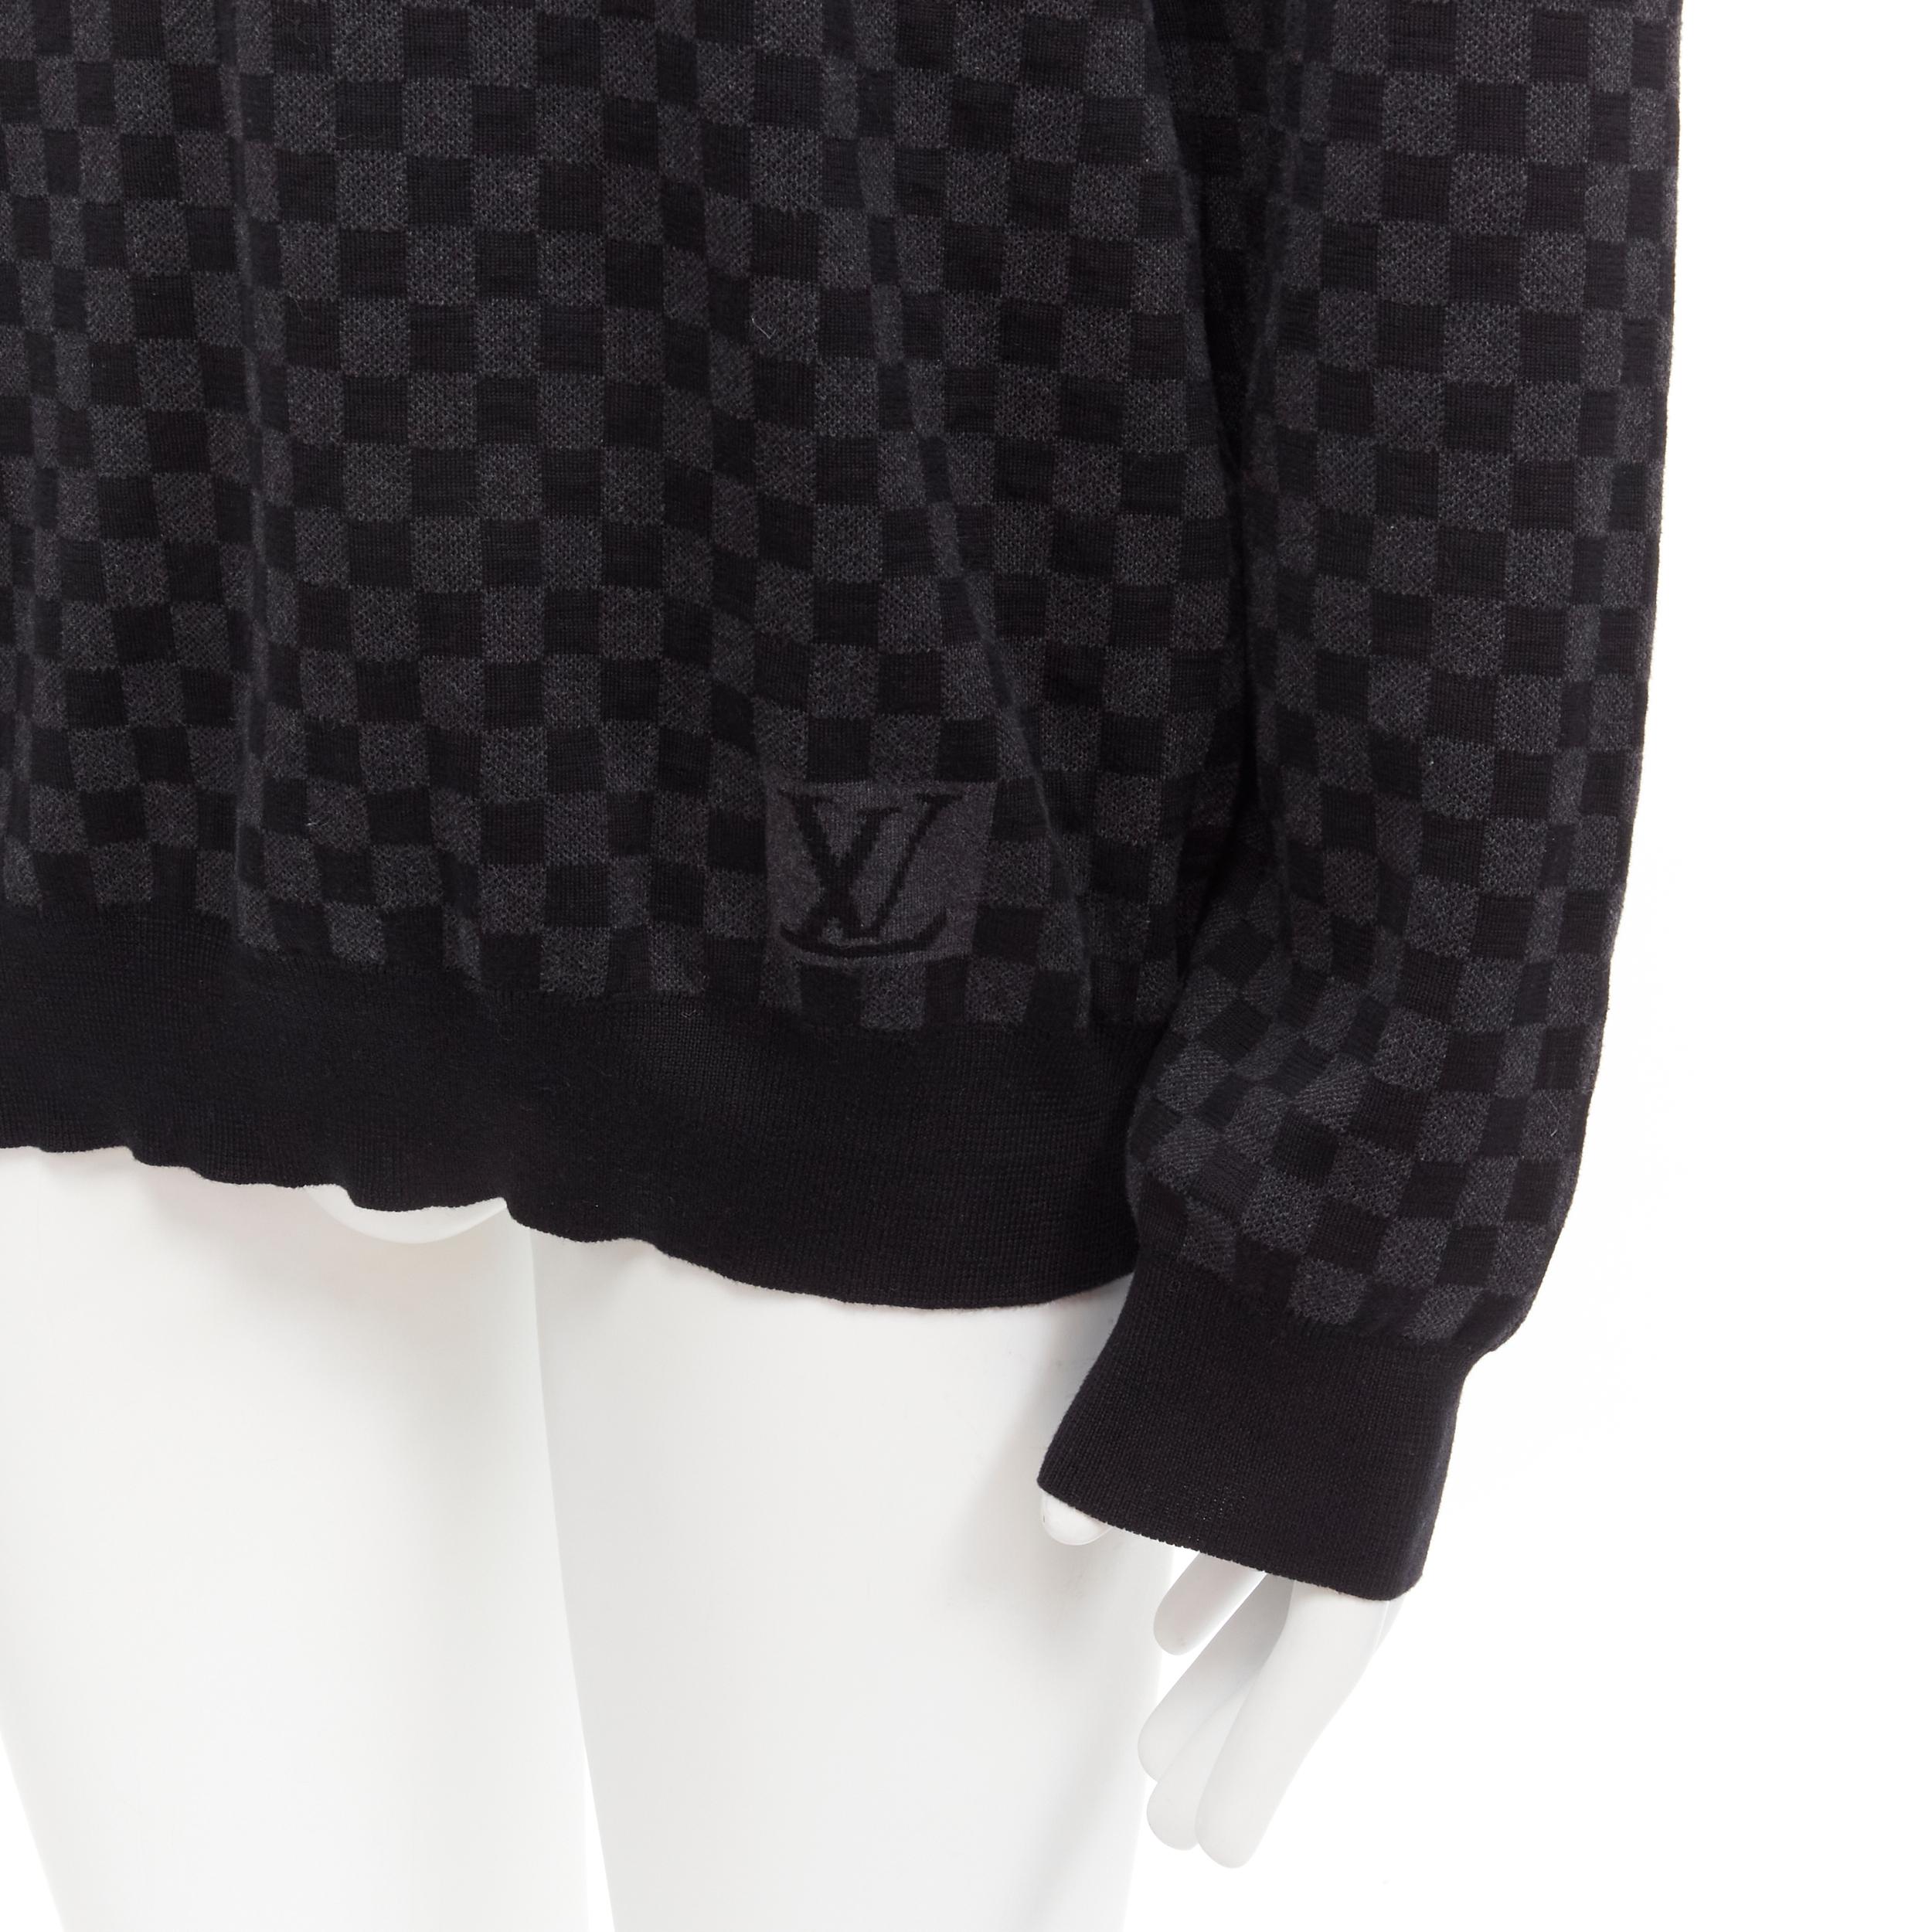 LOUIS VUITTON LV logo black grey signature damier check sweater XL
Reference: TGAS/C01878
Brand: Louis Vuitton
Collection: Damier
Material: Cotton
Color: Black, Grey
Pattern: Checkered
Closure: Pullover
Extra Details: LV logo at bottom hem